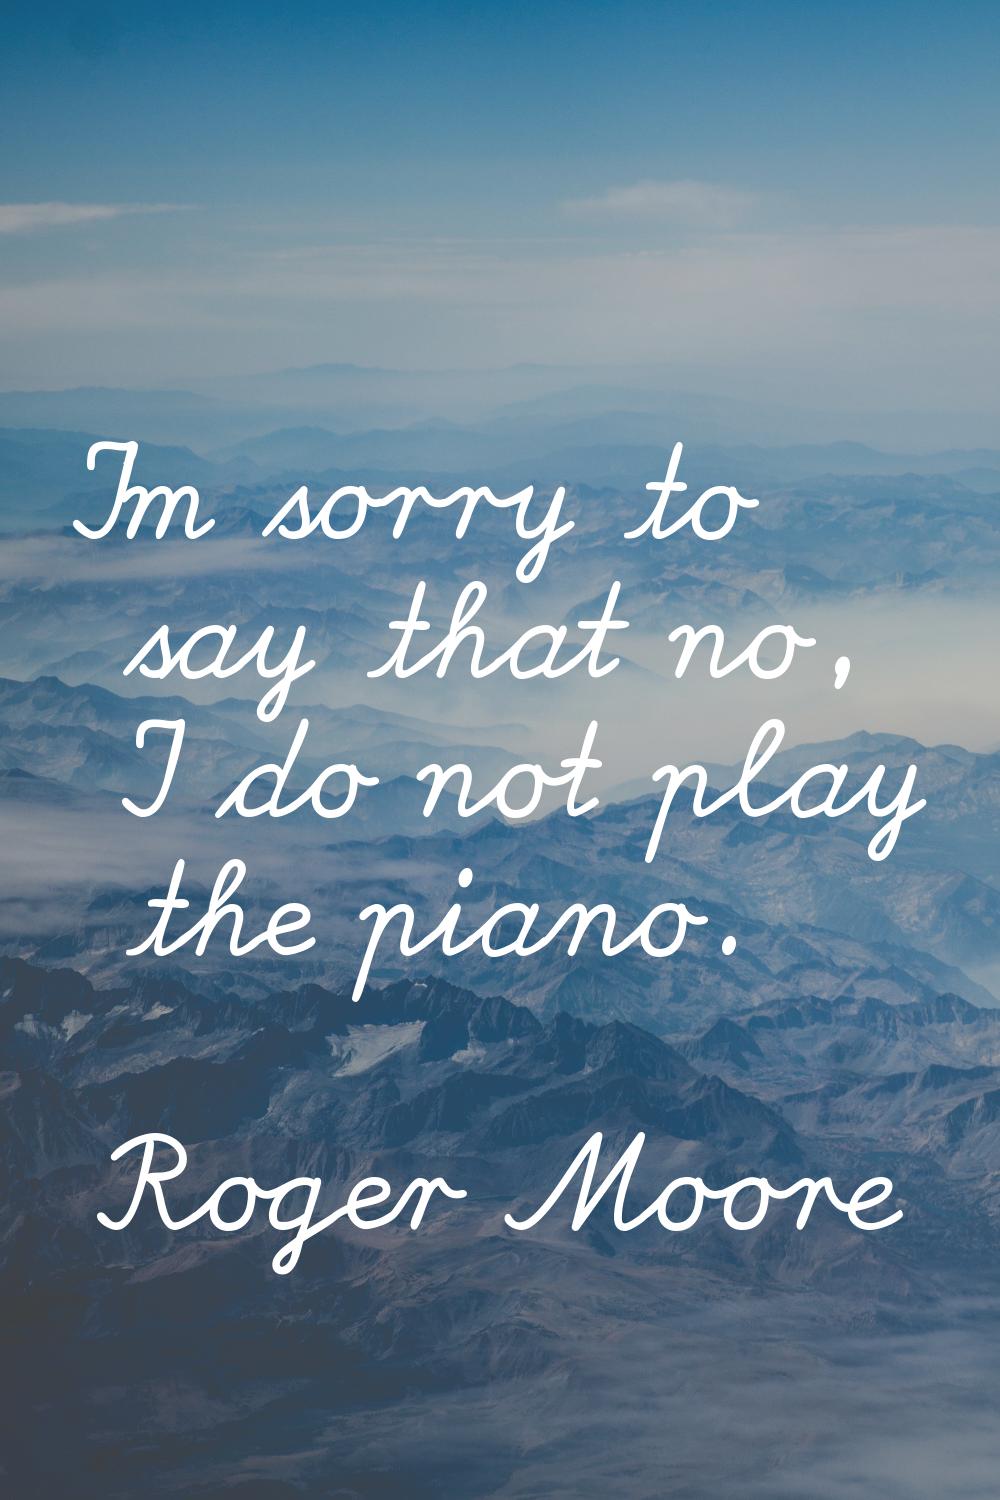 I'm sorry to say that no, I do not play the piano.